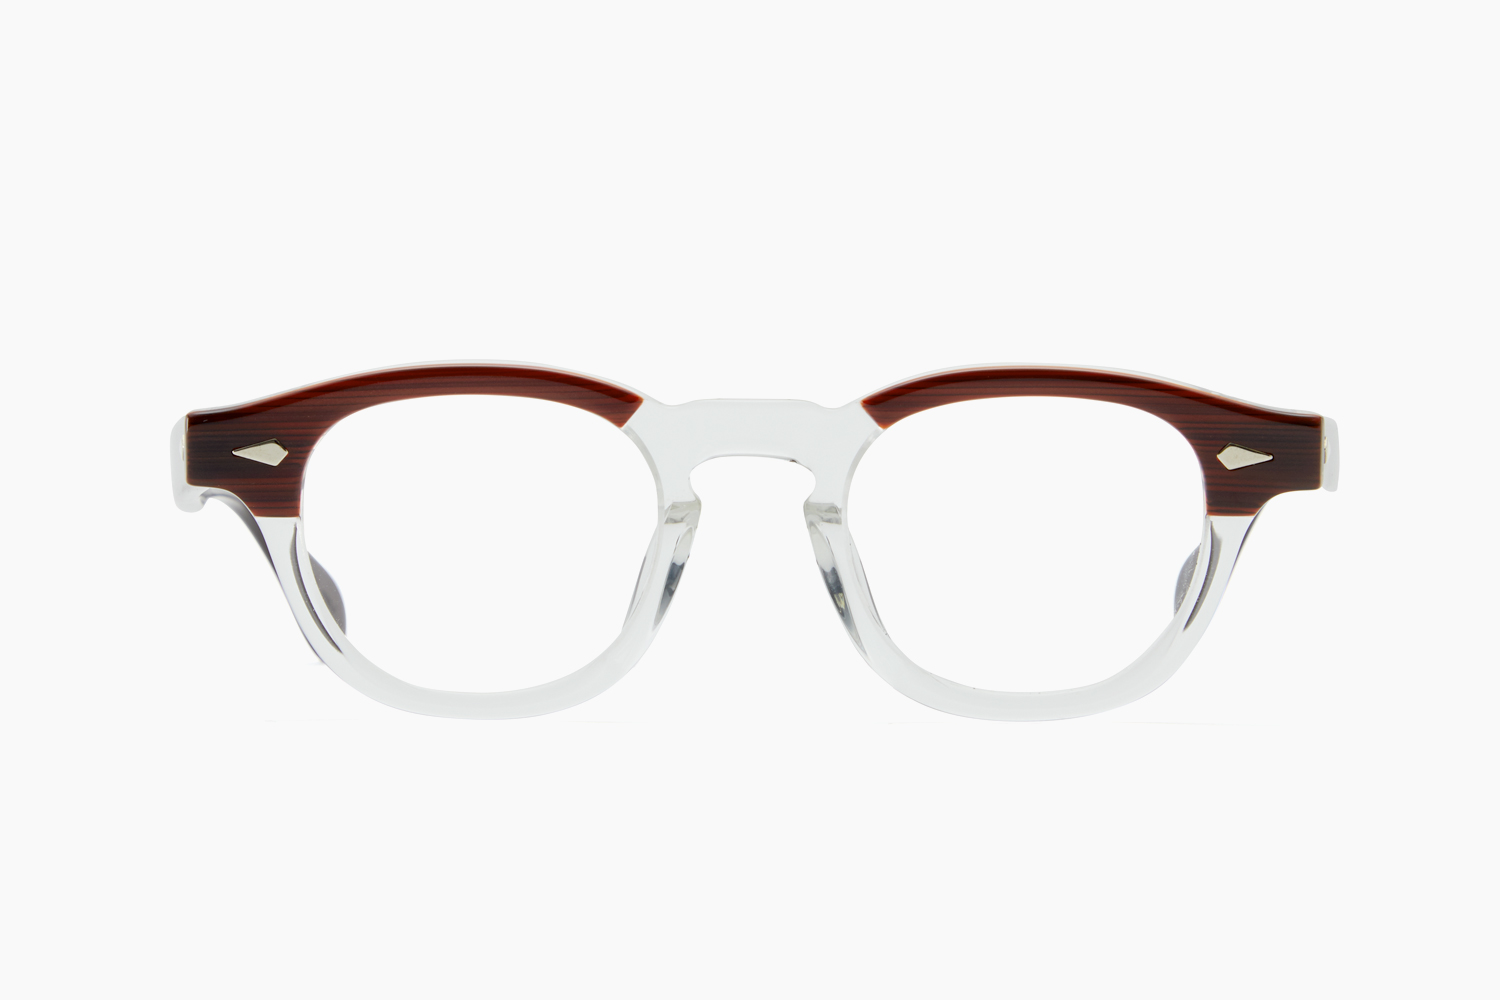 JULIUS TART OPTICAL｜AR 42 - Red Wood Clear｜PRODUCT｜Continuer